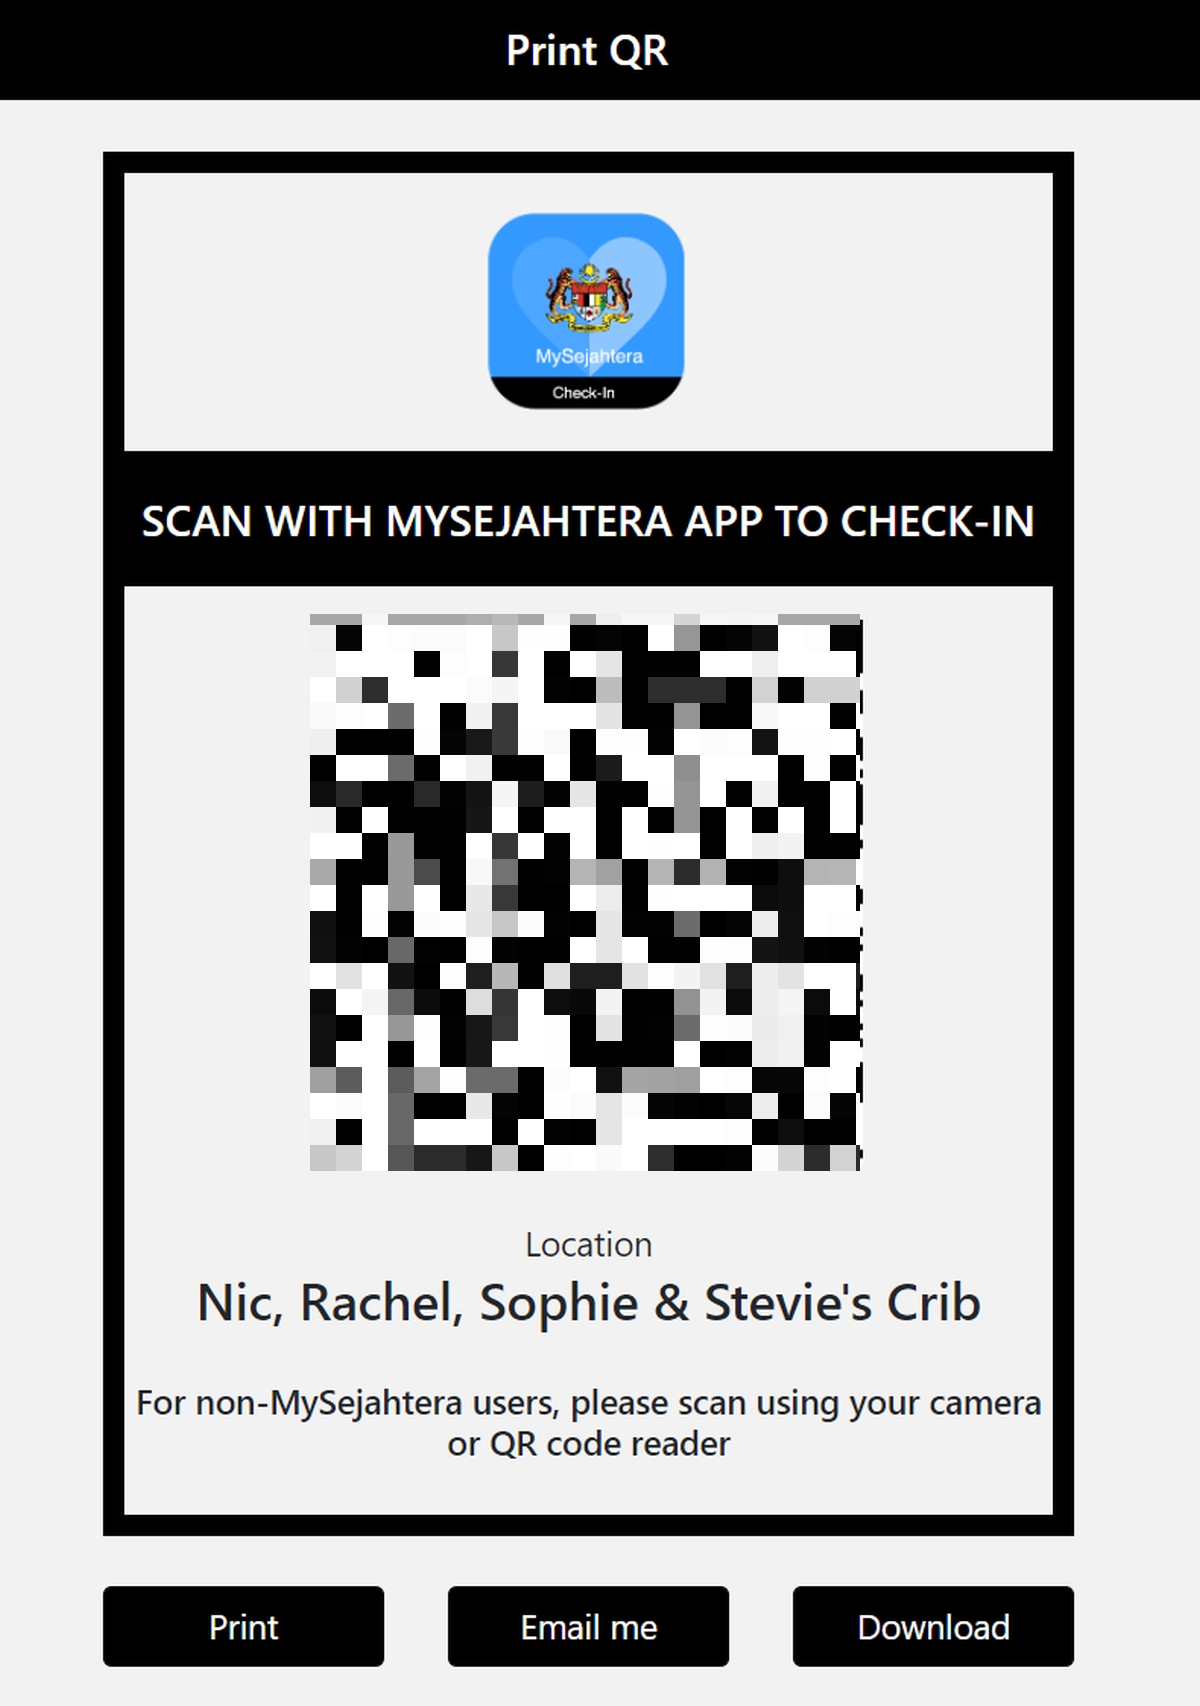 How to create mysejahtera qr code for business